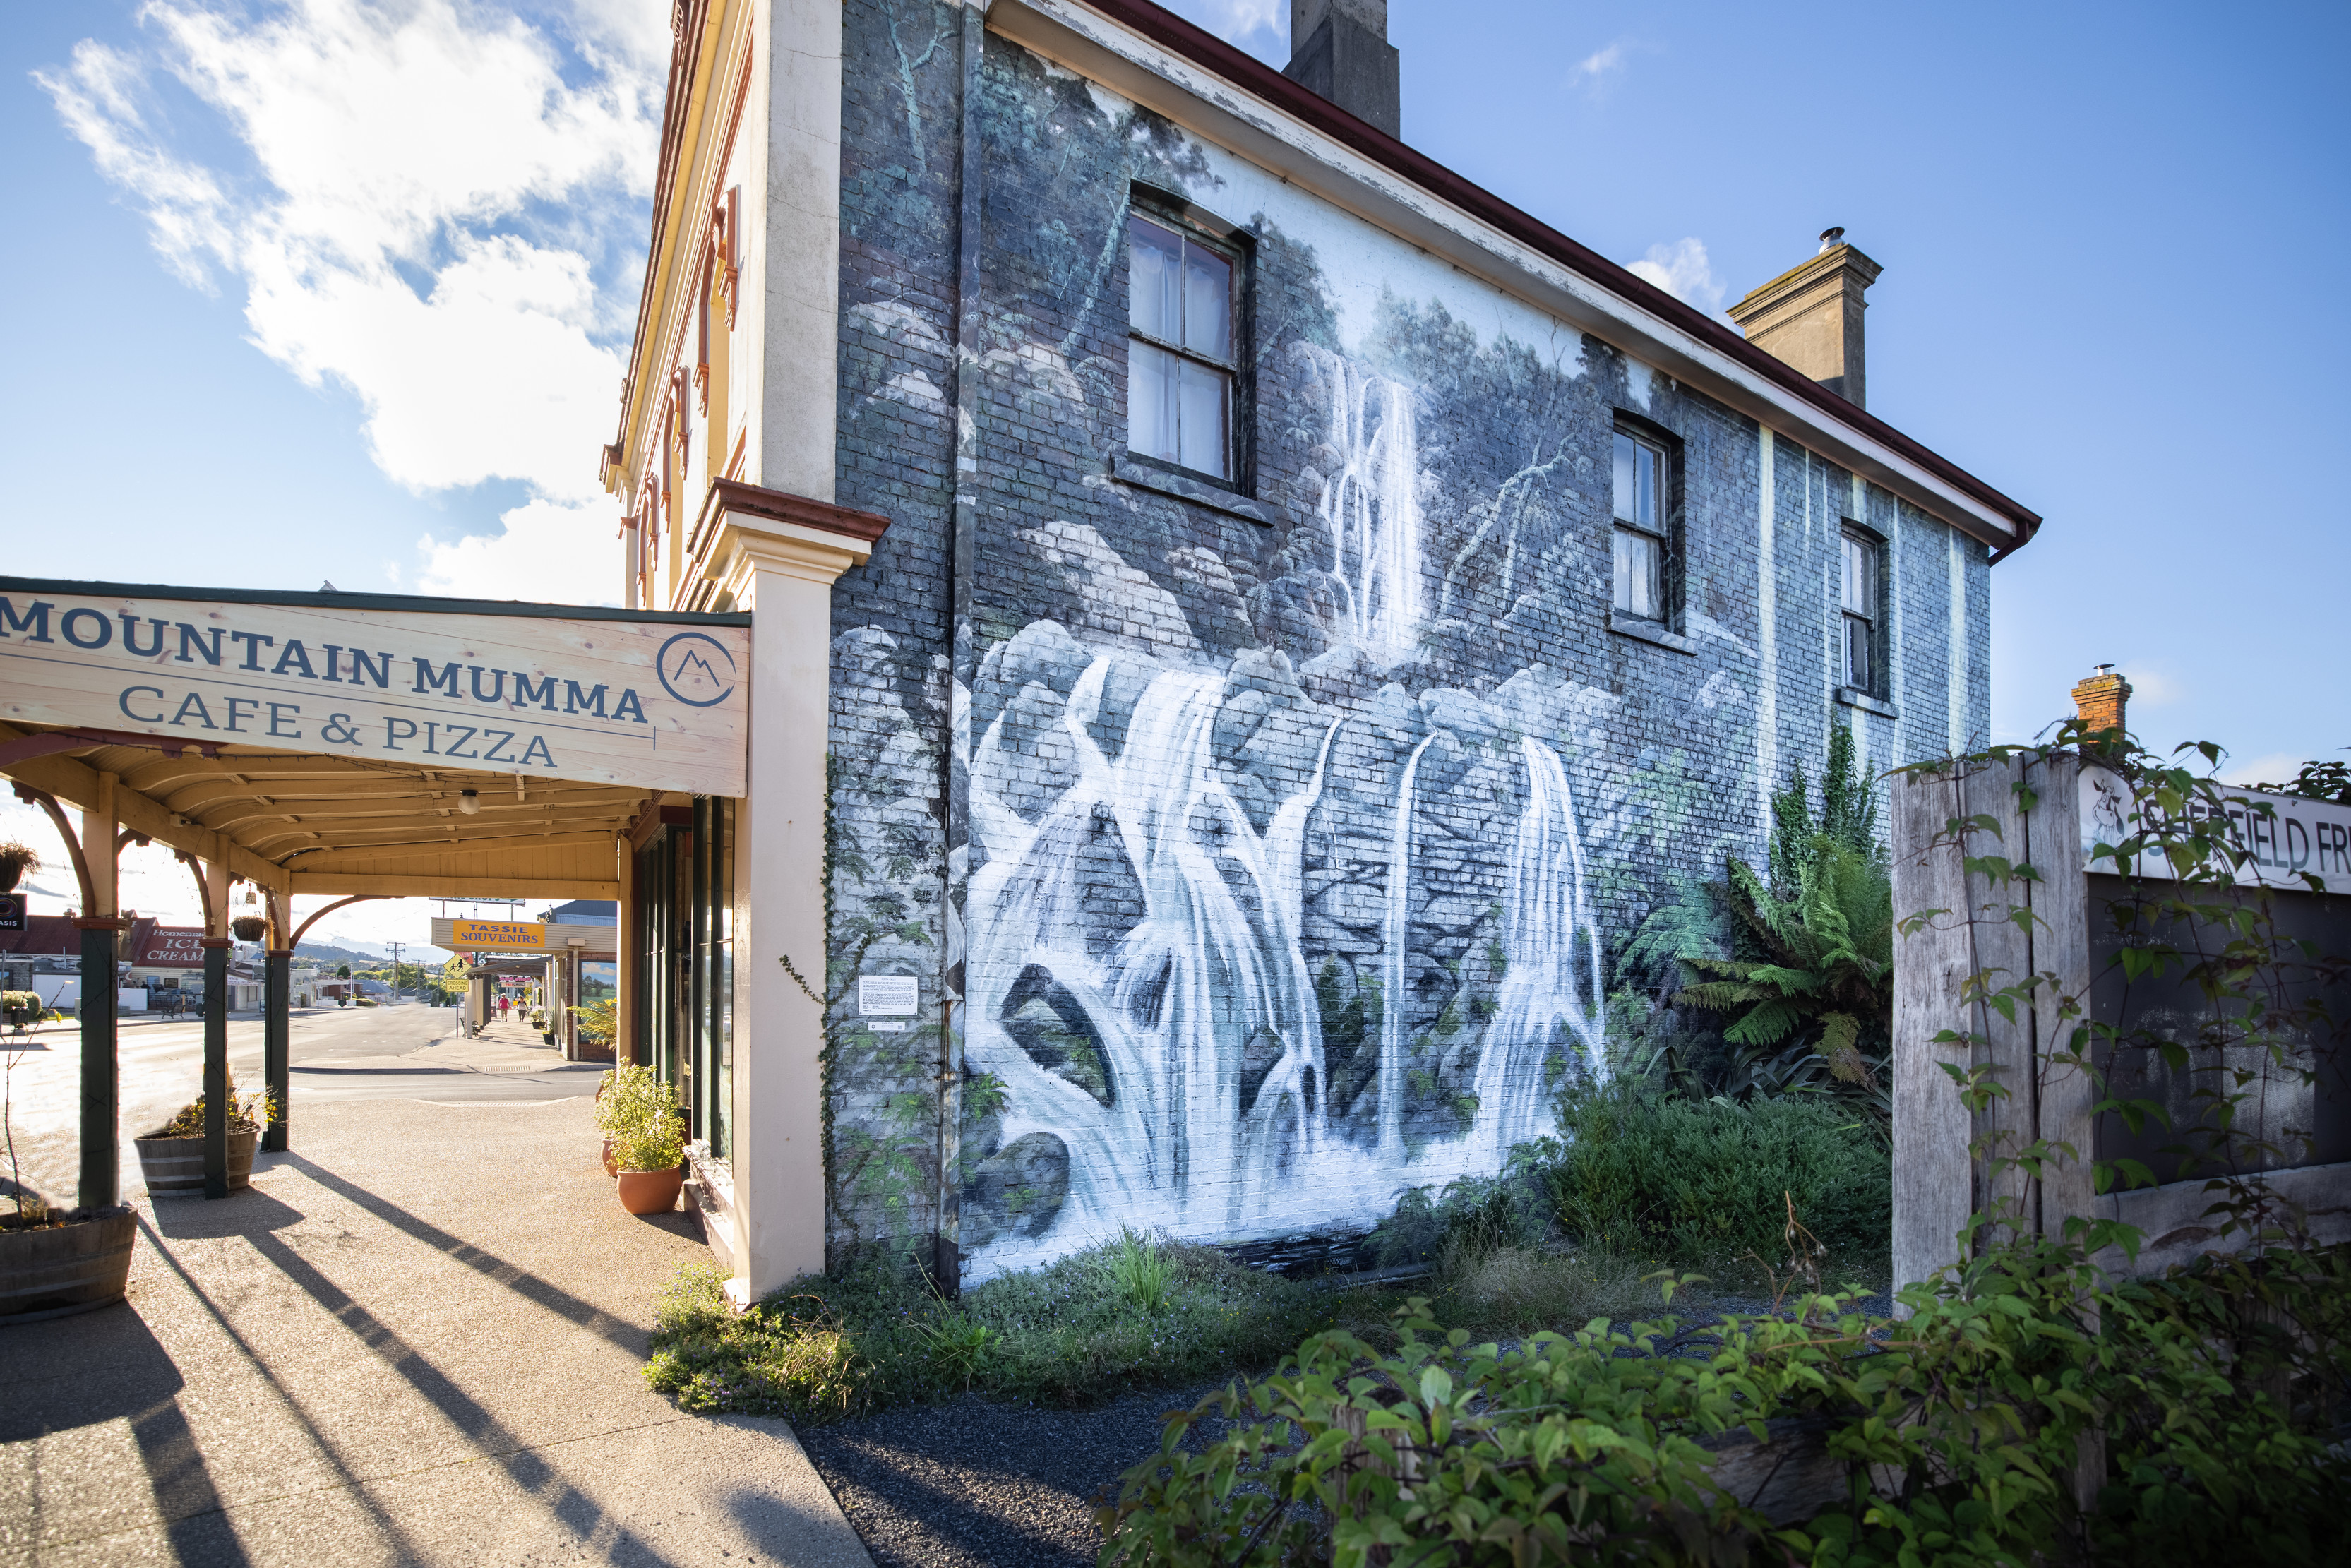 Stunning waterfall mural painted on the side of Mountain Mumma Cafe and Pizza.